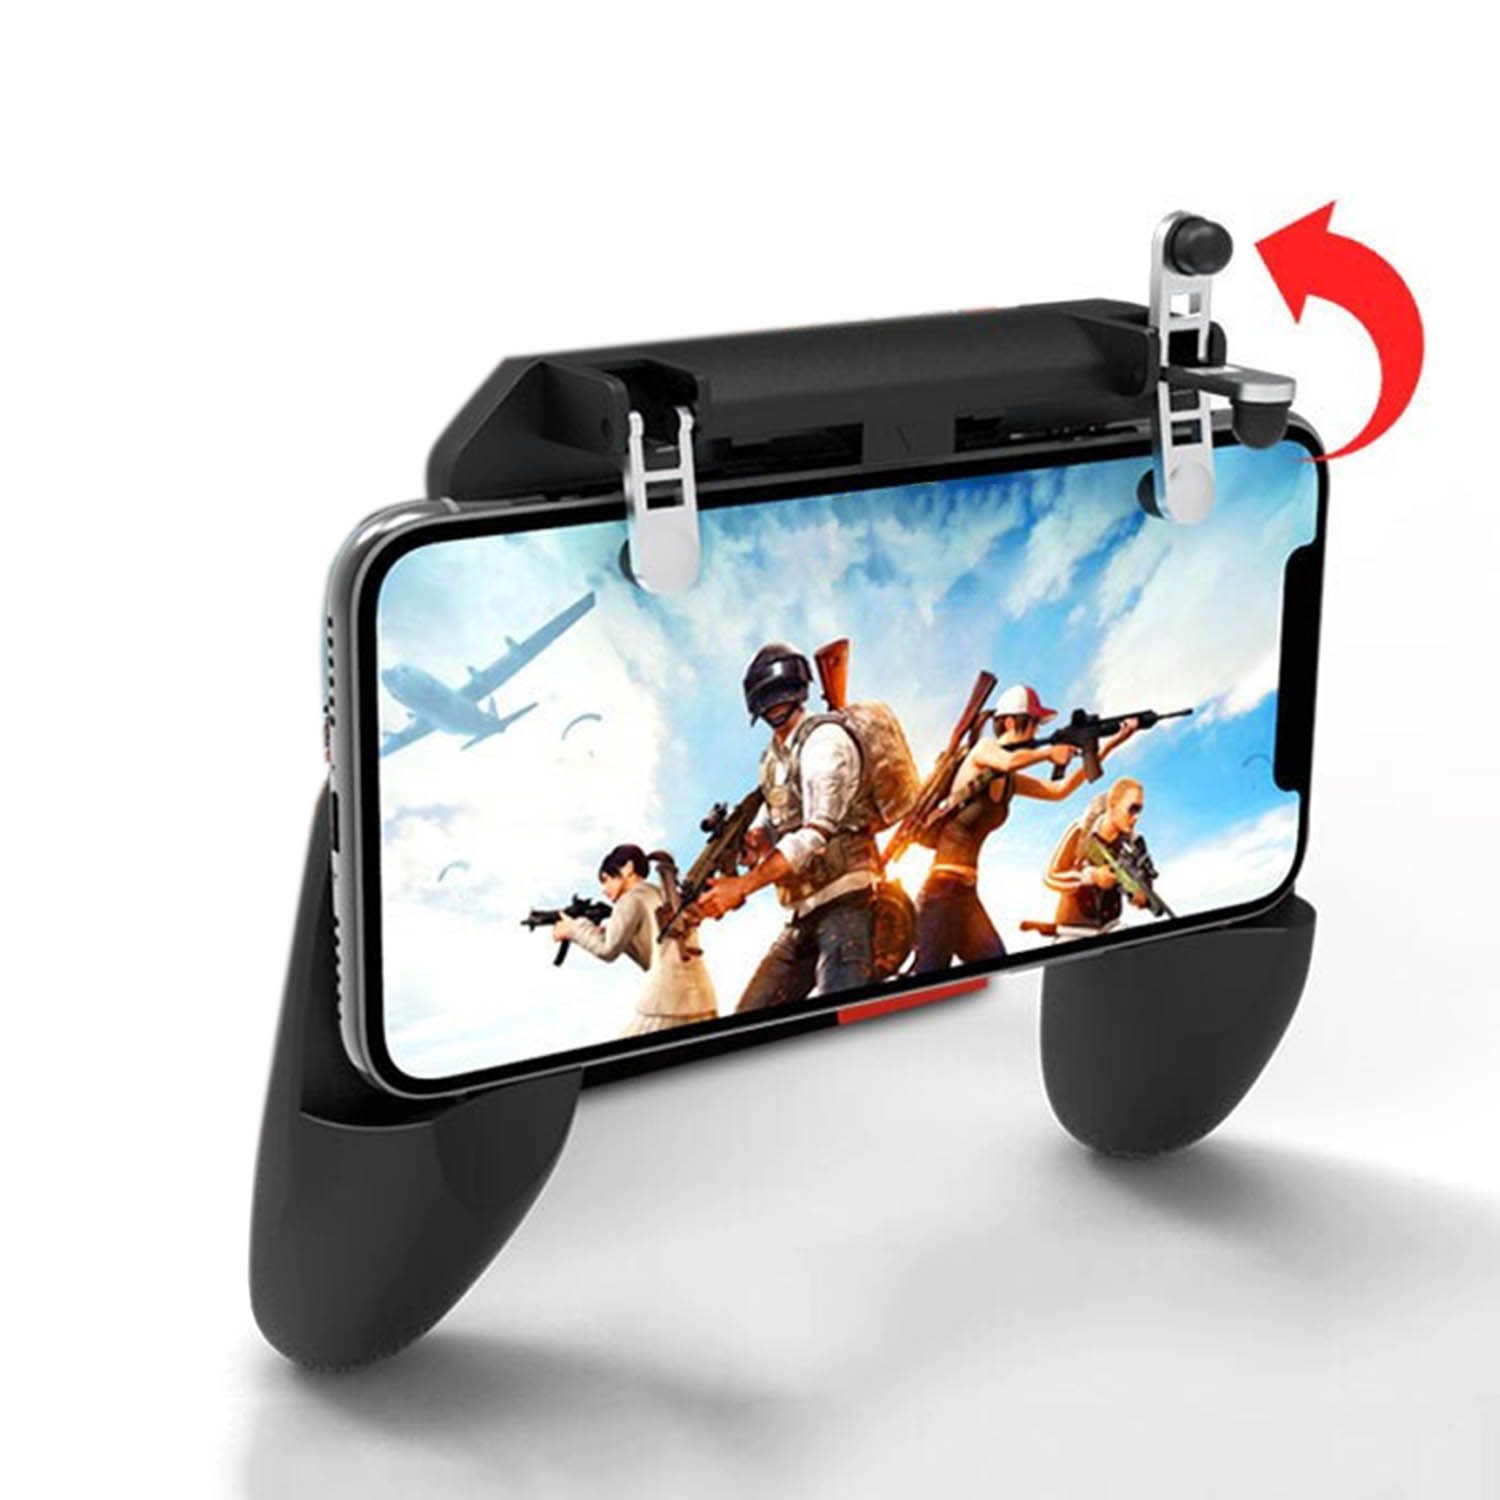 Raptech W10 Gamepad Handle Grip Wireless Controller Joystick with Metal Buttons Trigger Key for Android iOS Smart Phone